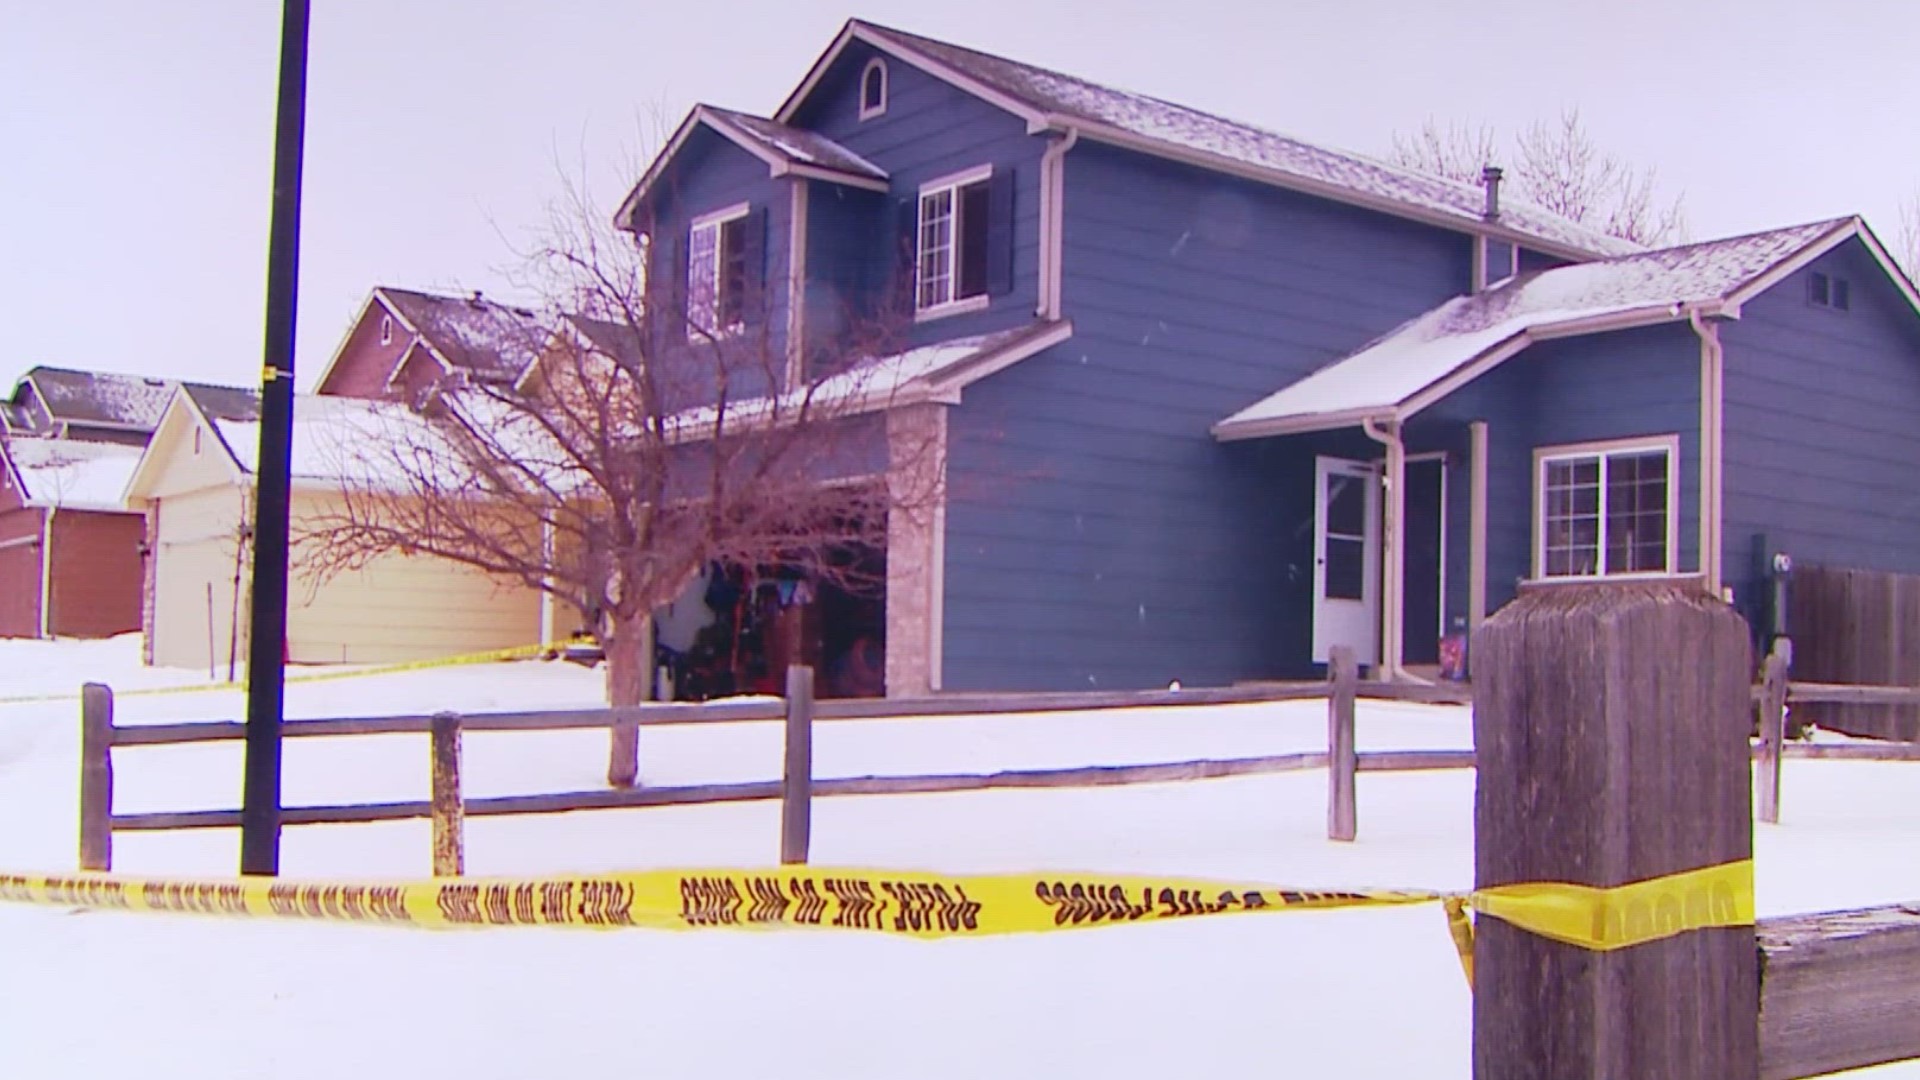 Two were found dead at the top of the Rueter-Hess Incline, and a third person was found in a Parker home, authorities said.